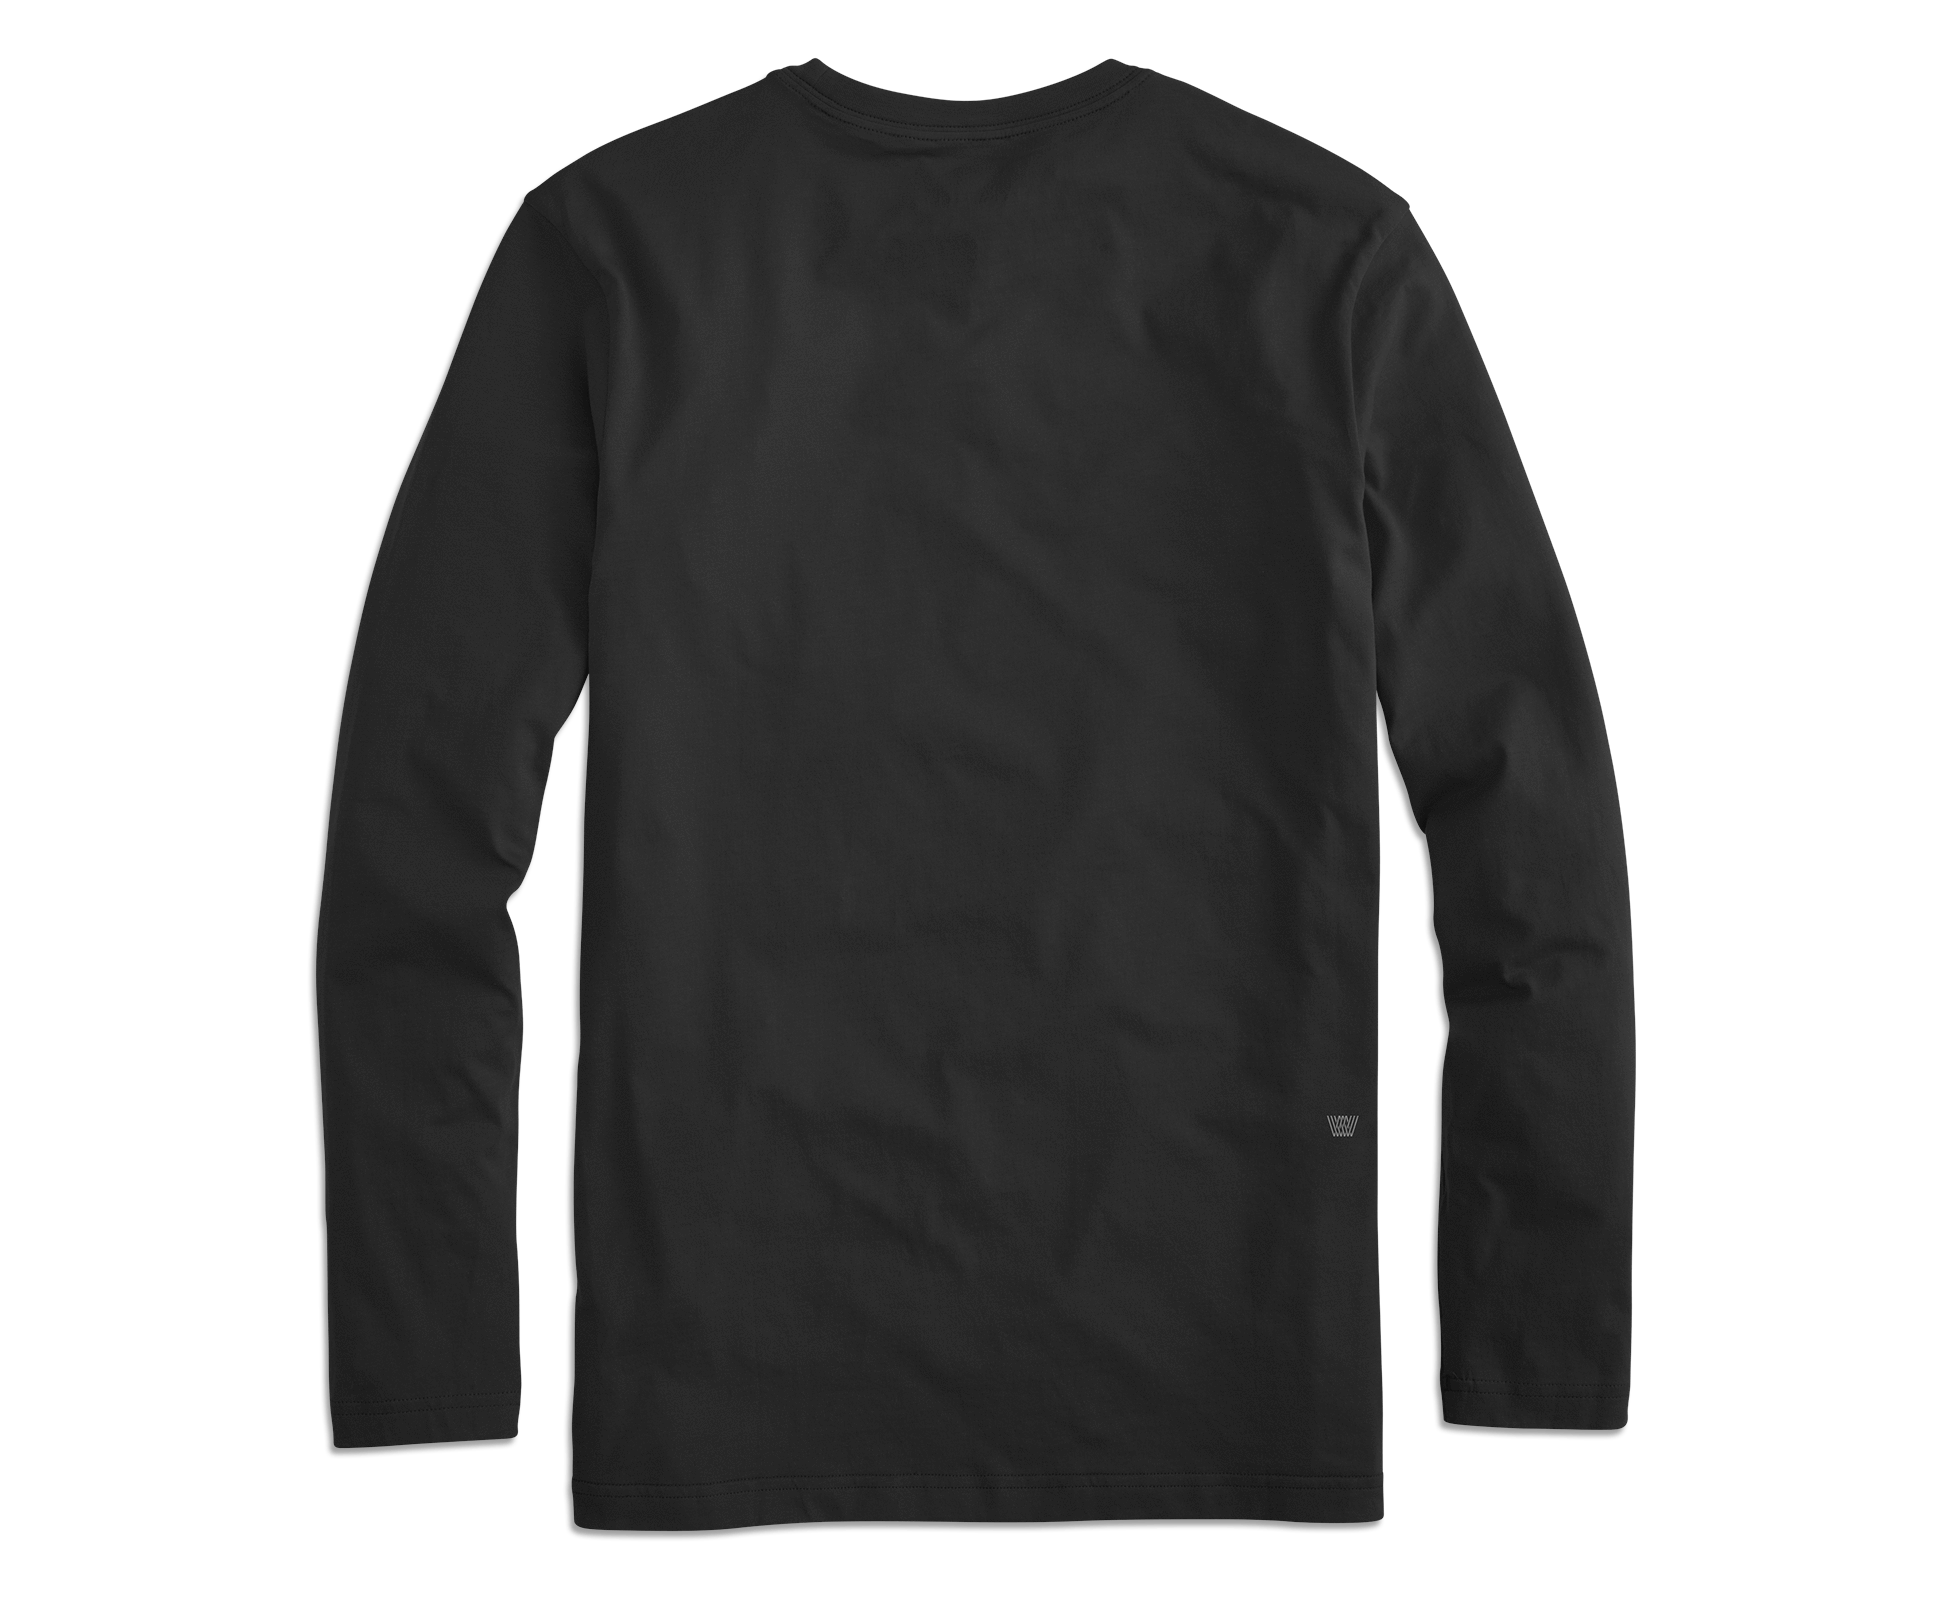  Other Stories textured low back long sleeve top in black